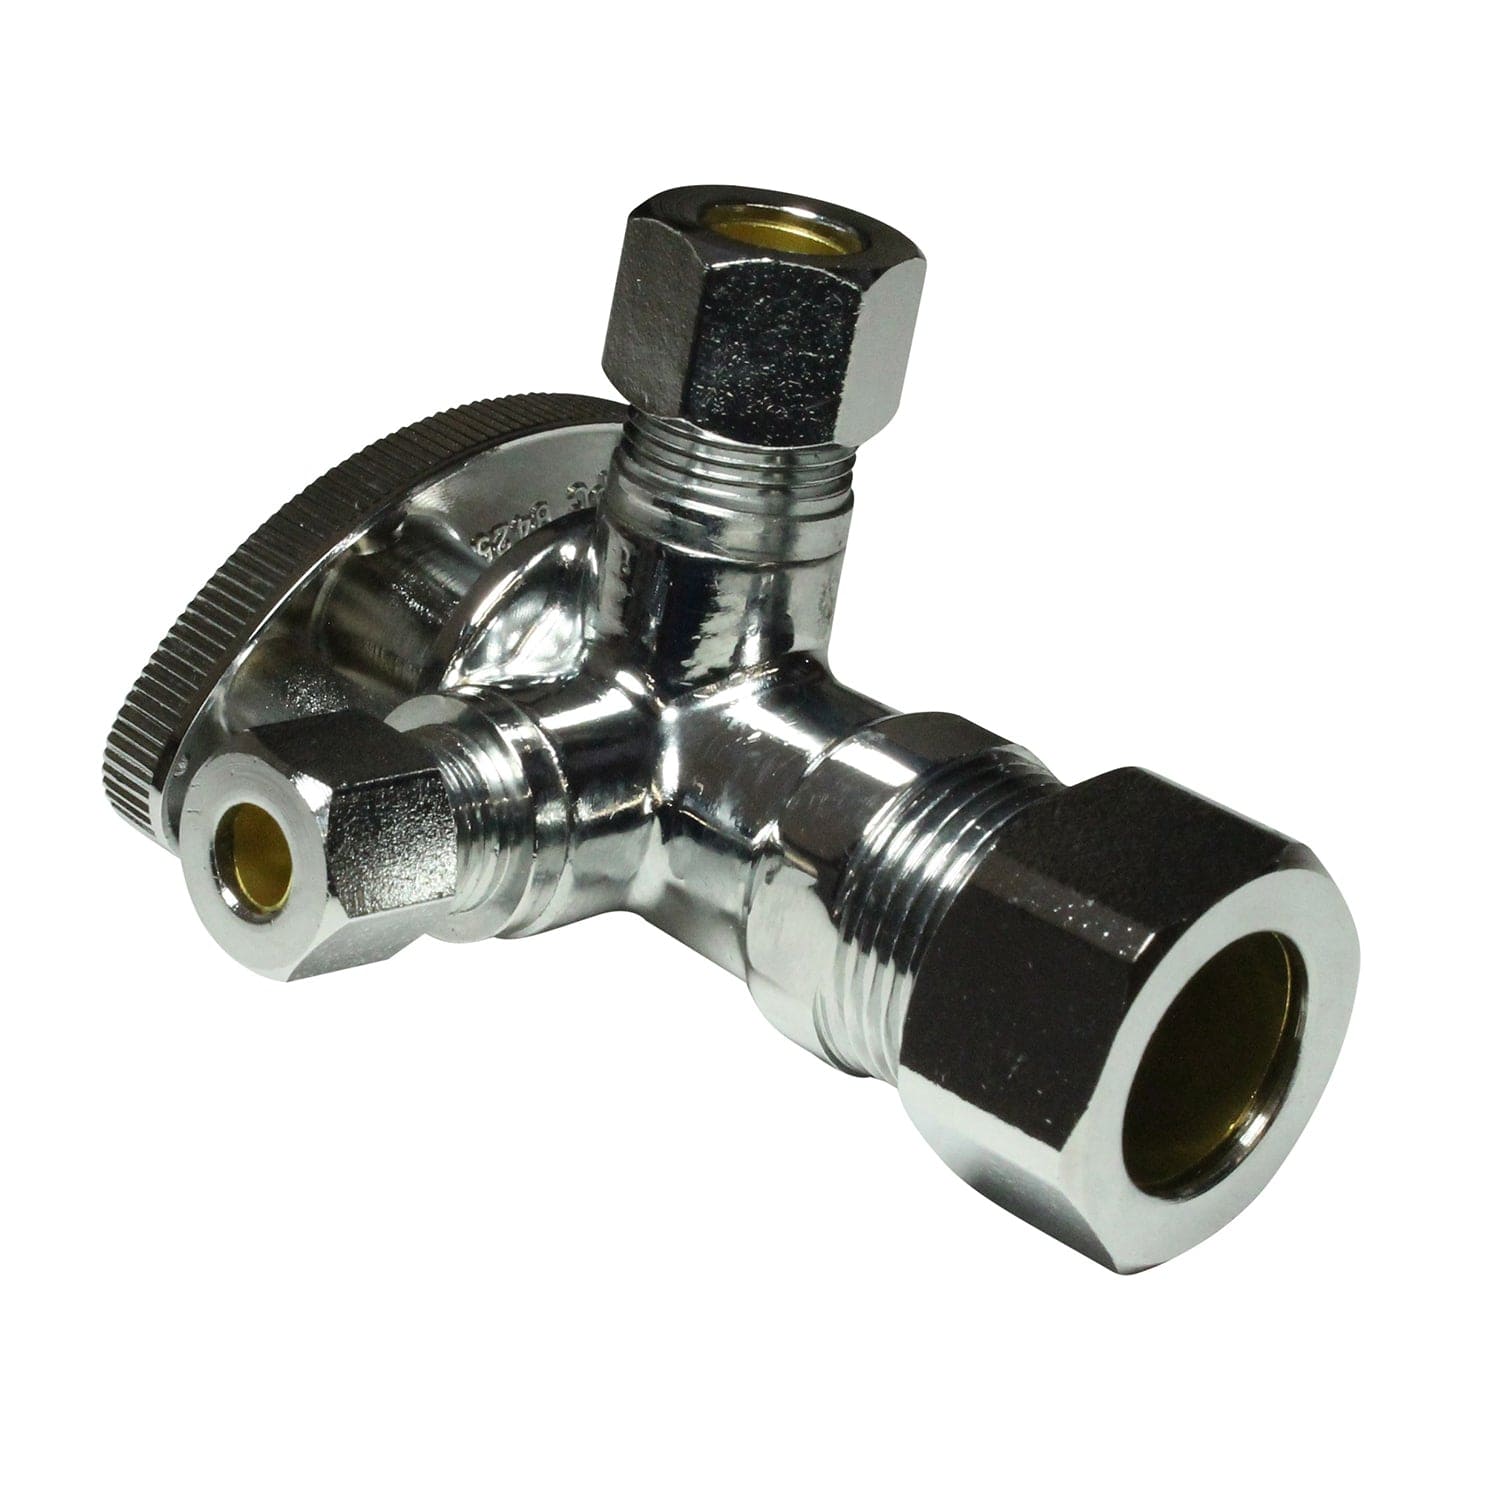 3/8" x 1/4" 1/4 Turn Dual Compression Angle Stop Valve